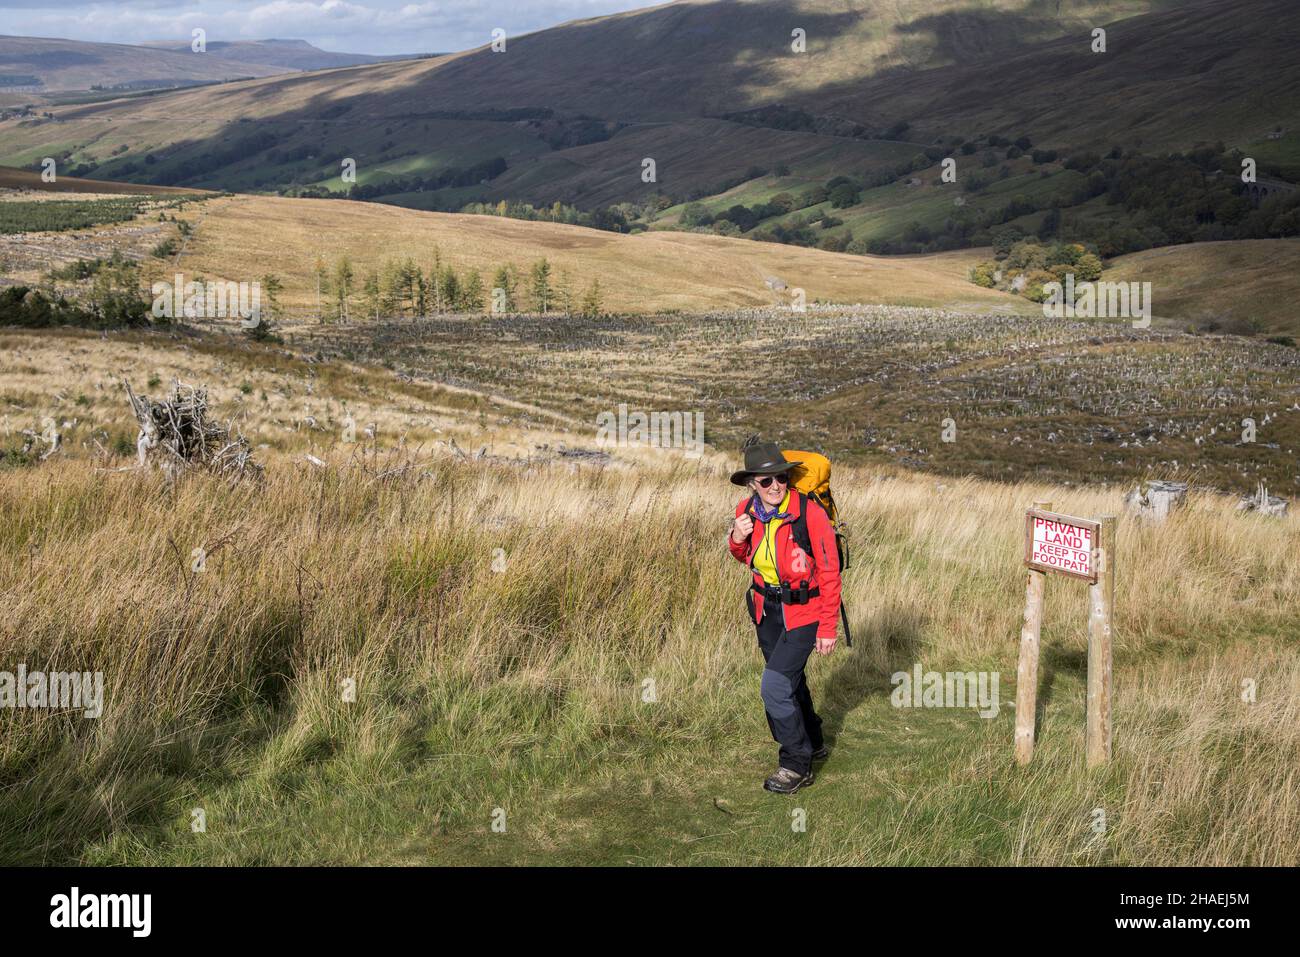 Private land keep to footpath sign on moorland, Yorkshire Dales, UK Stock Photo